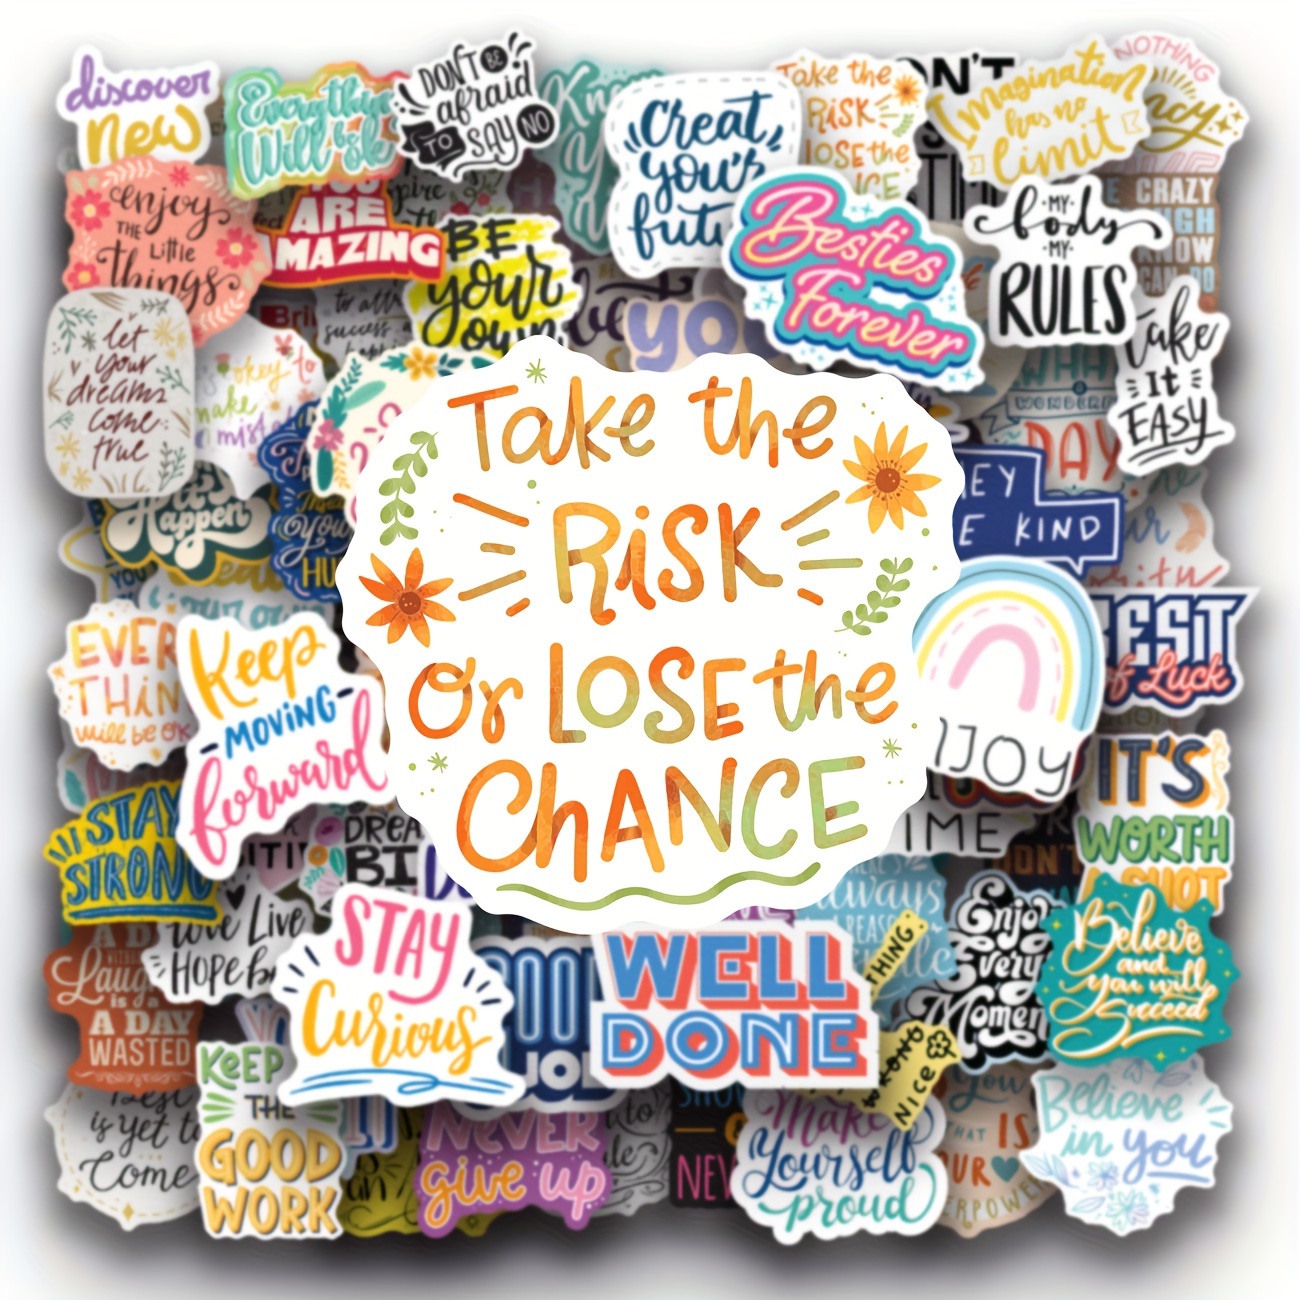  300PCS Inspirational Stickers, Motivational Quote Stickers for  Adults Teens Students Teacher Employees School Classroom, Positive  Affirmation Stickers for Water Bottles Laptop Book Skateboard Phone : Toys  & Games